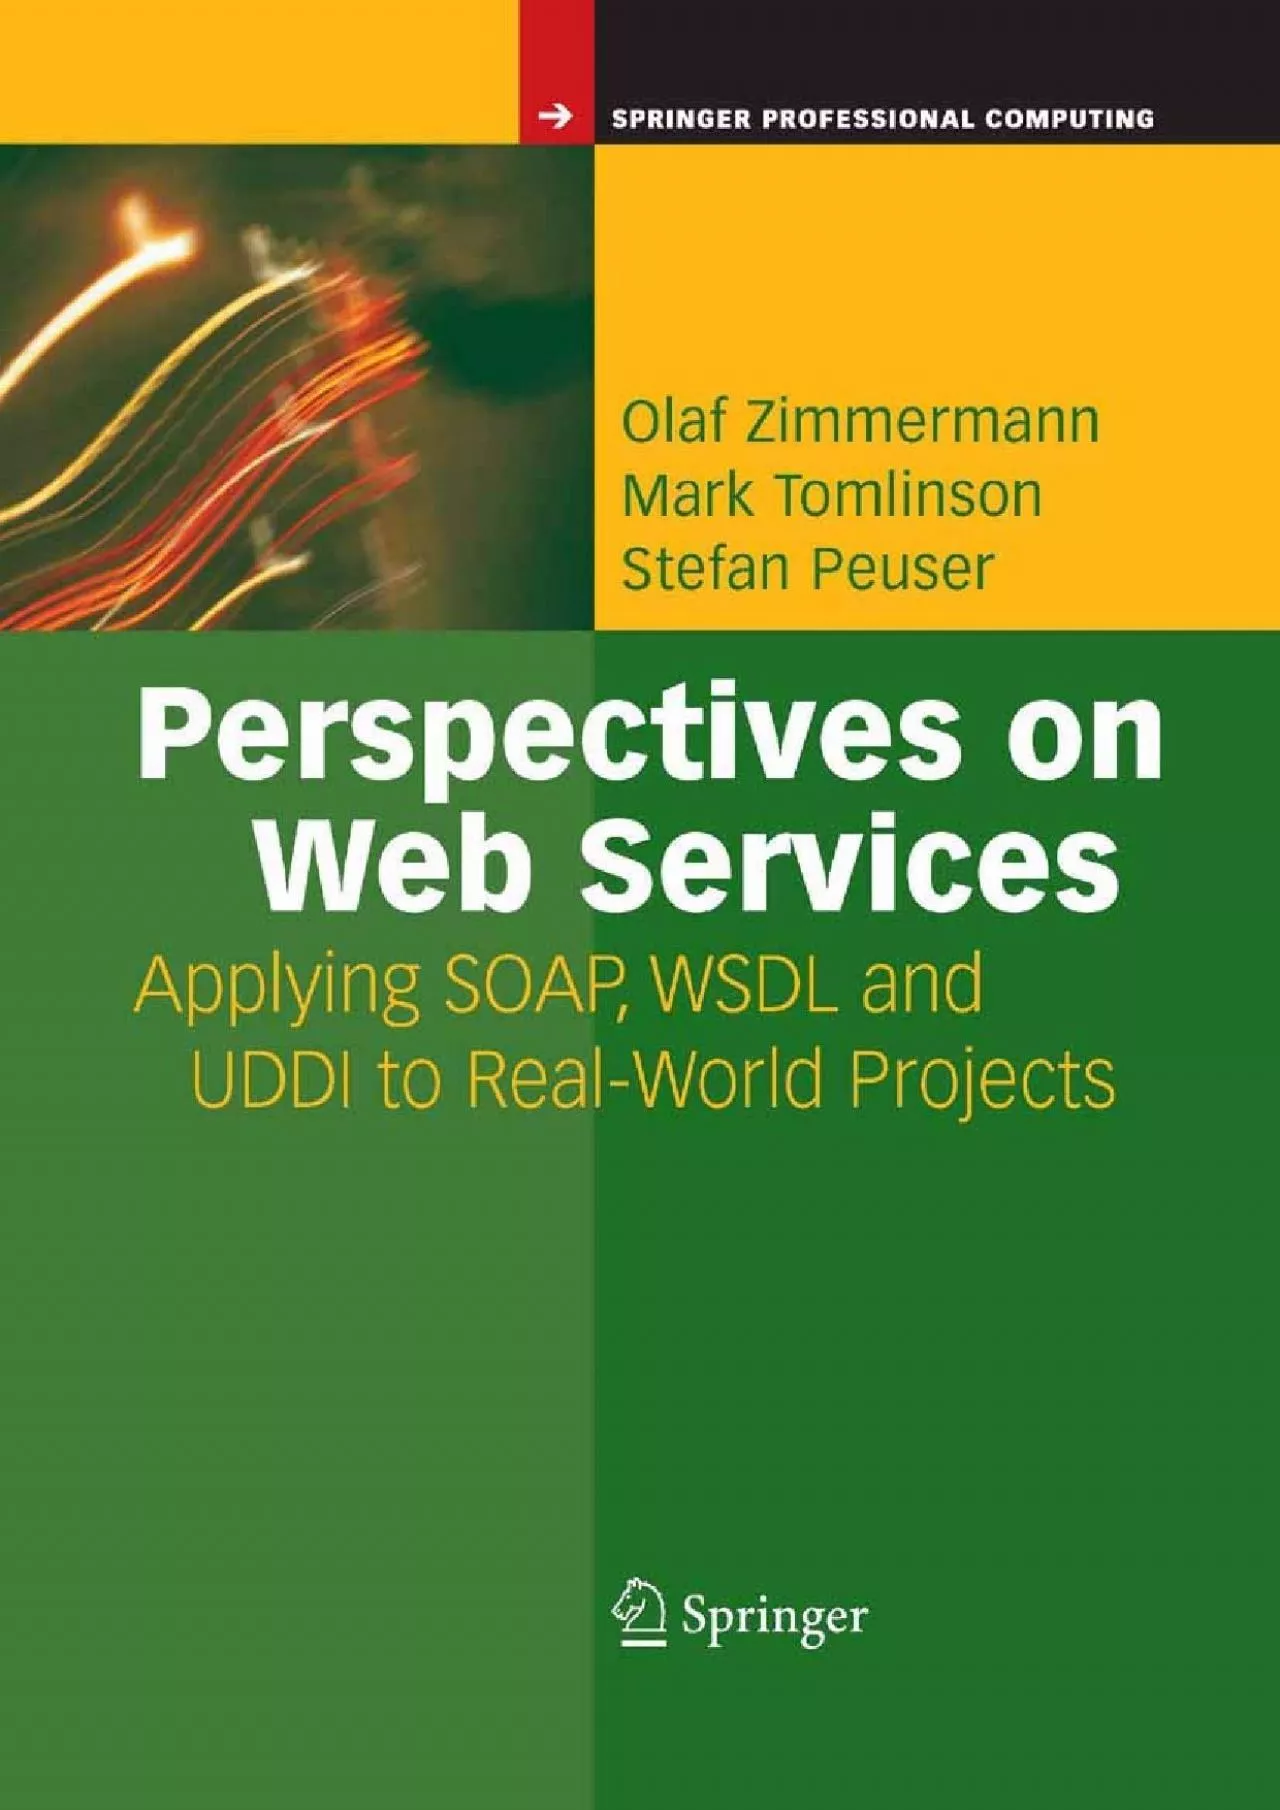 [PDF]-Perspectives on Web Services: Applying SOAP, WSDL and UDDI to Real-World Projects